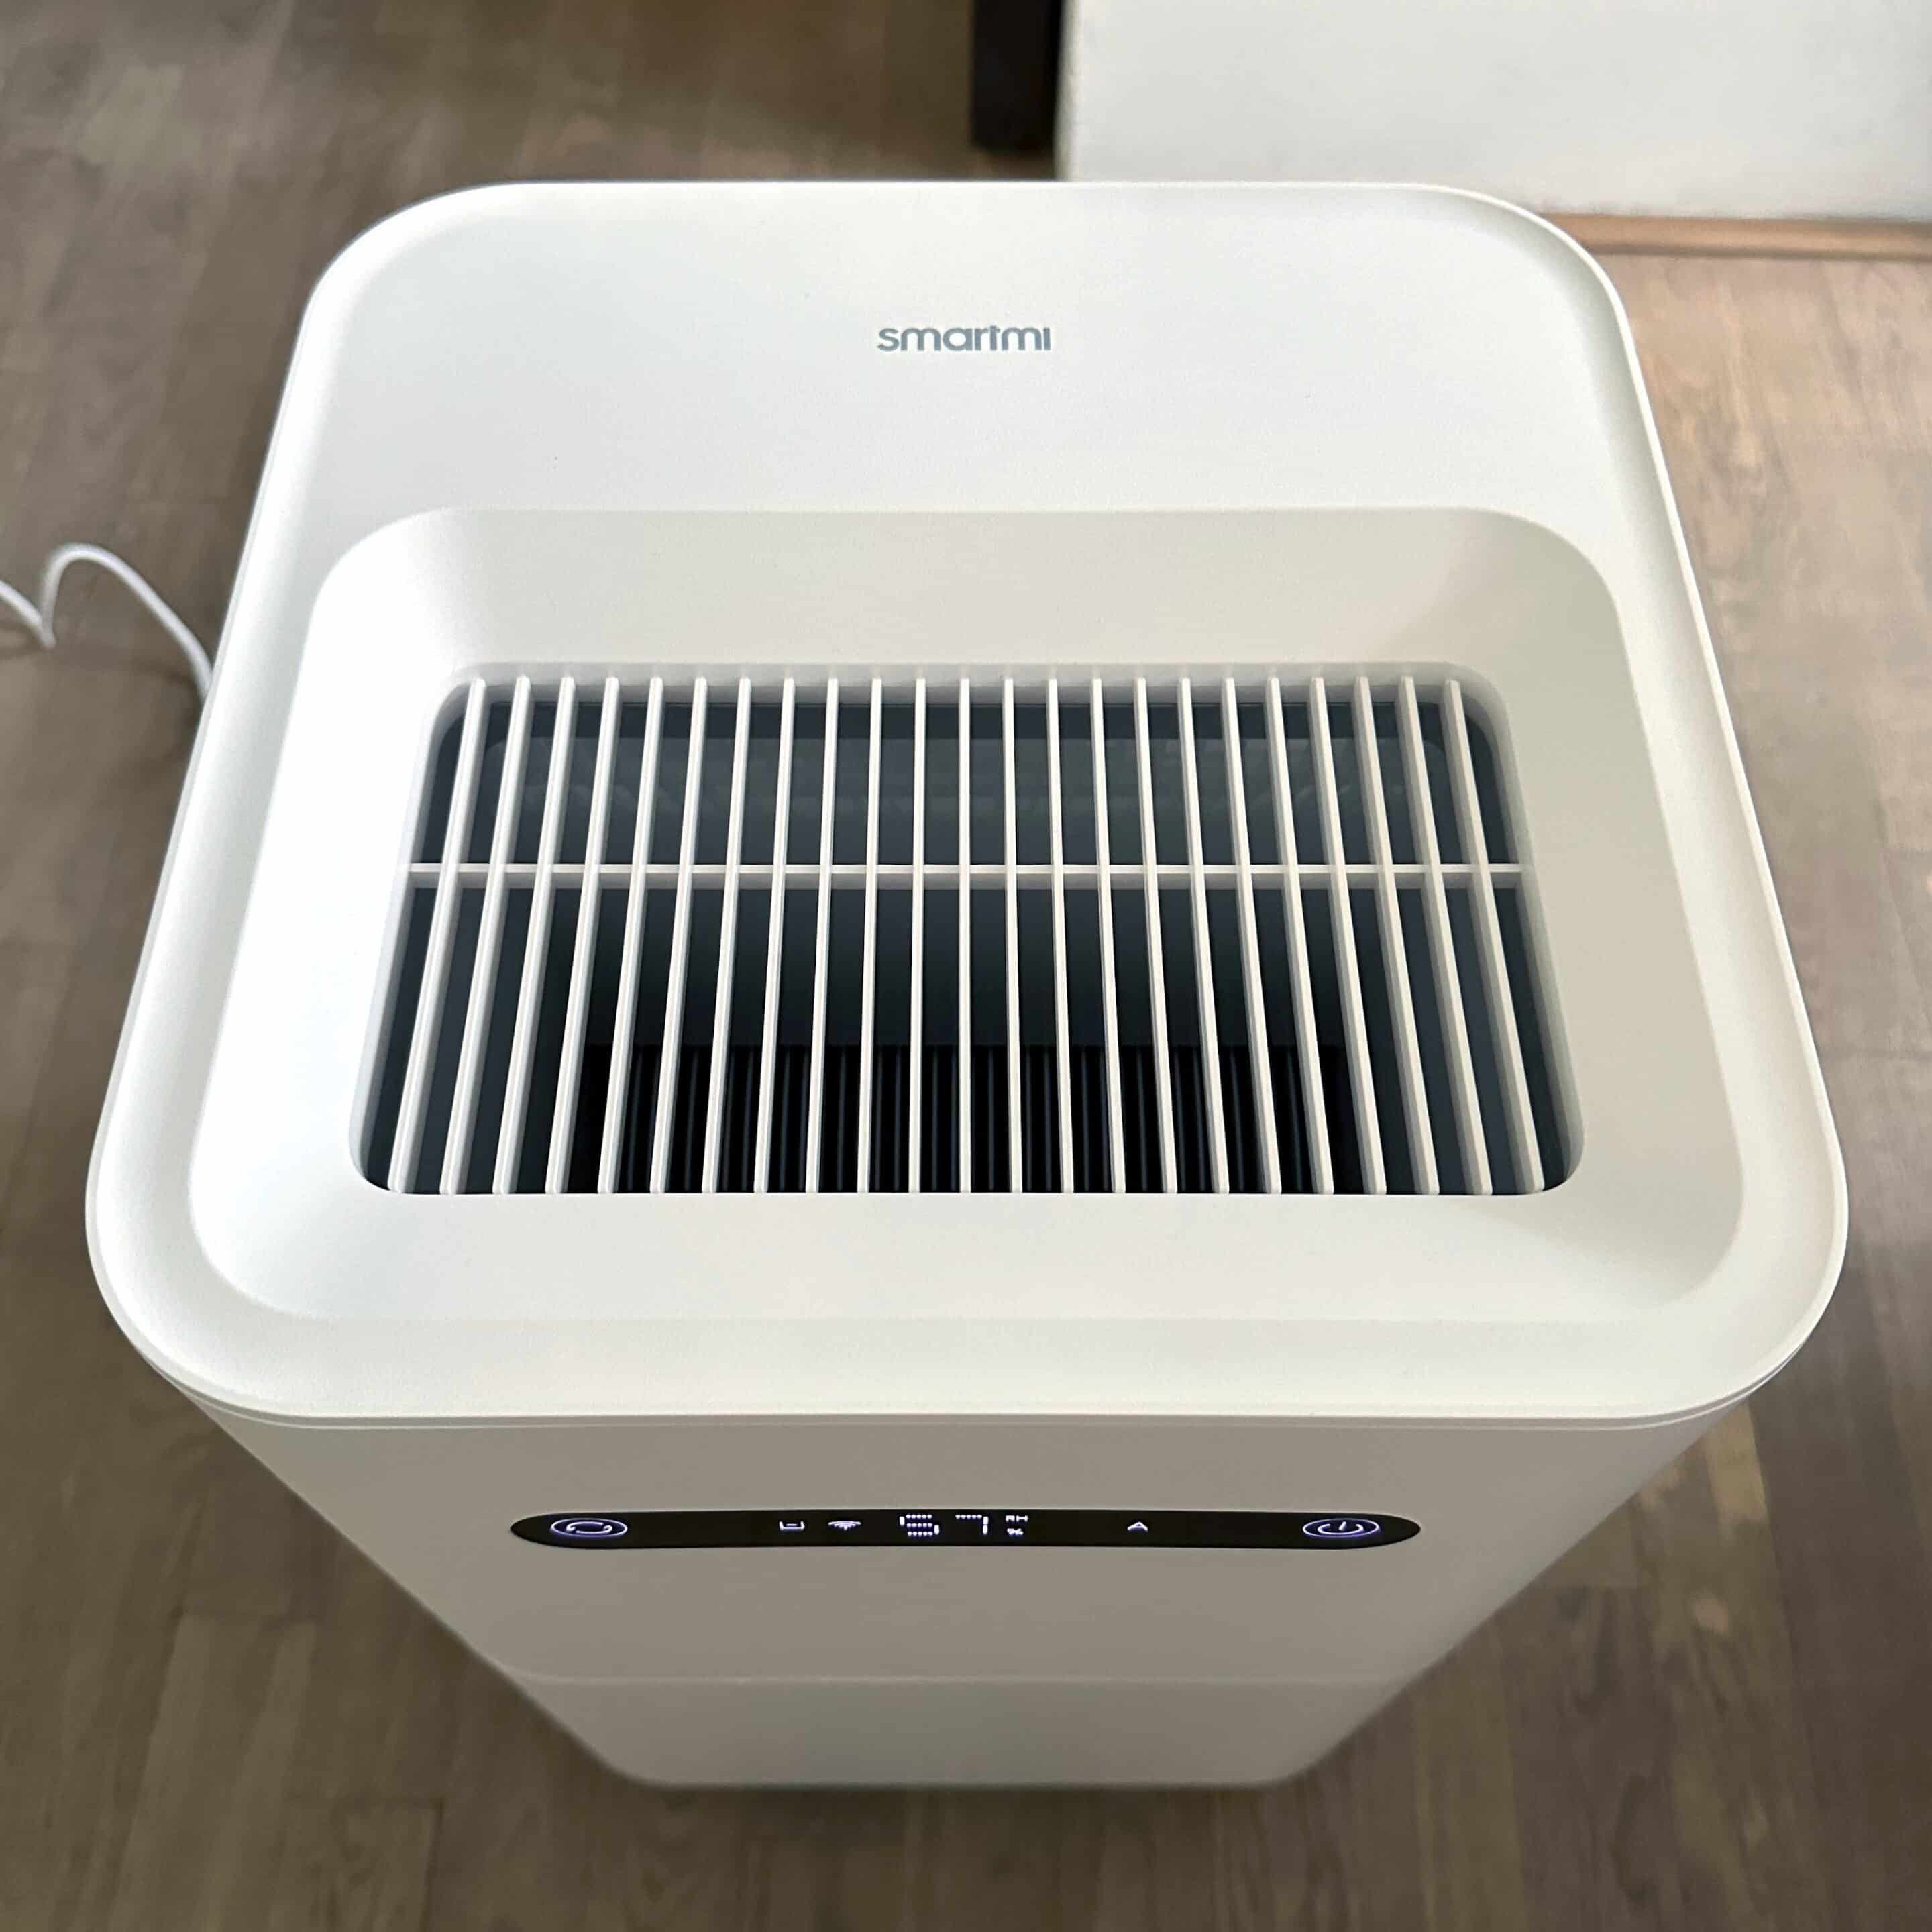 New Smartmi Humidifier 3 – We’re Missing One Crucial Thing